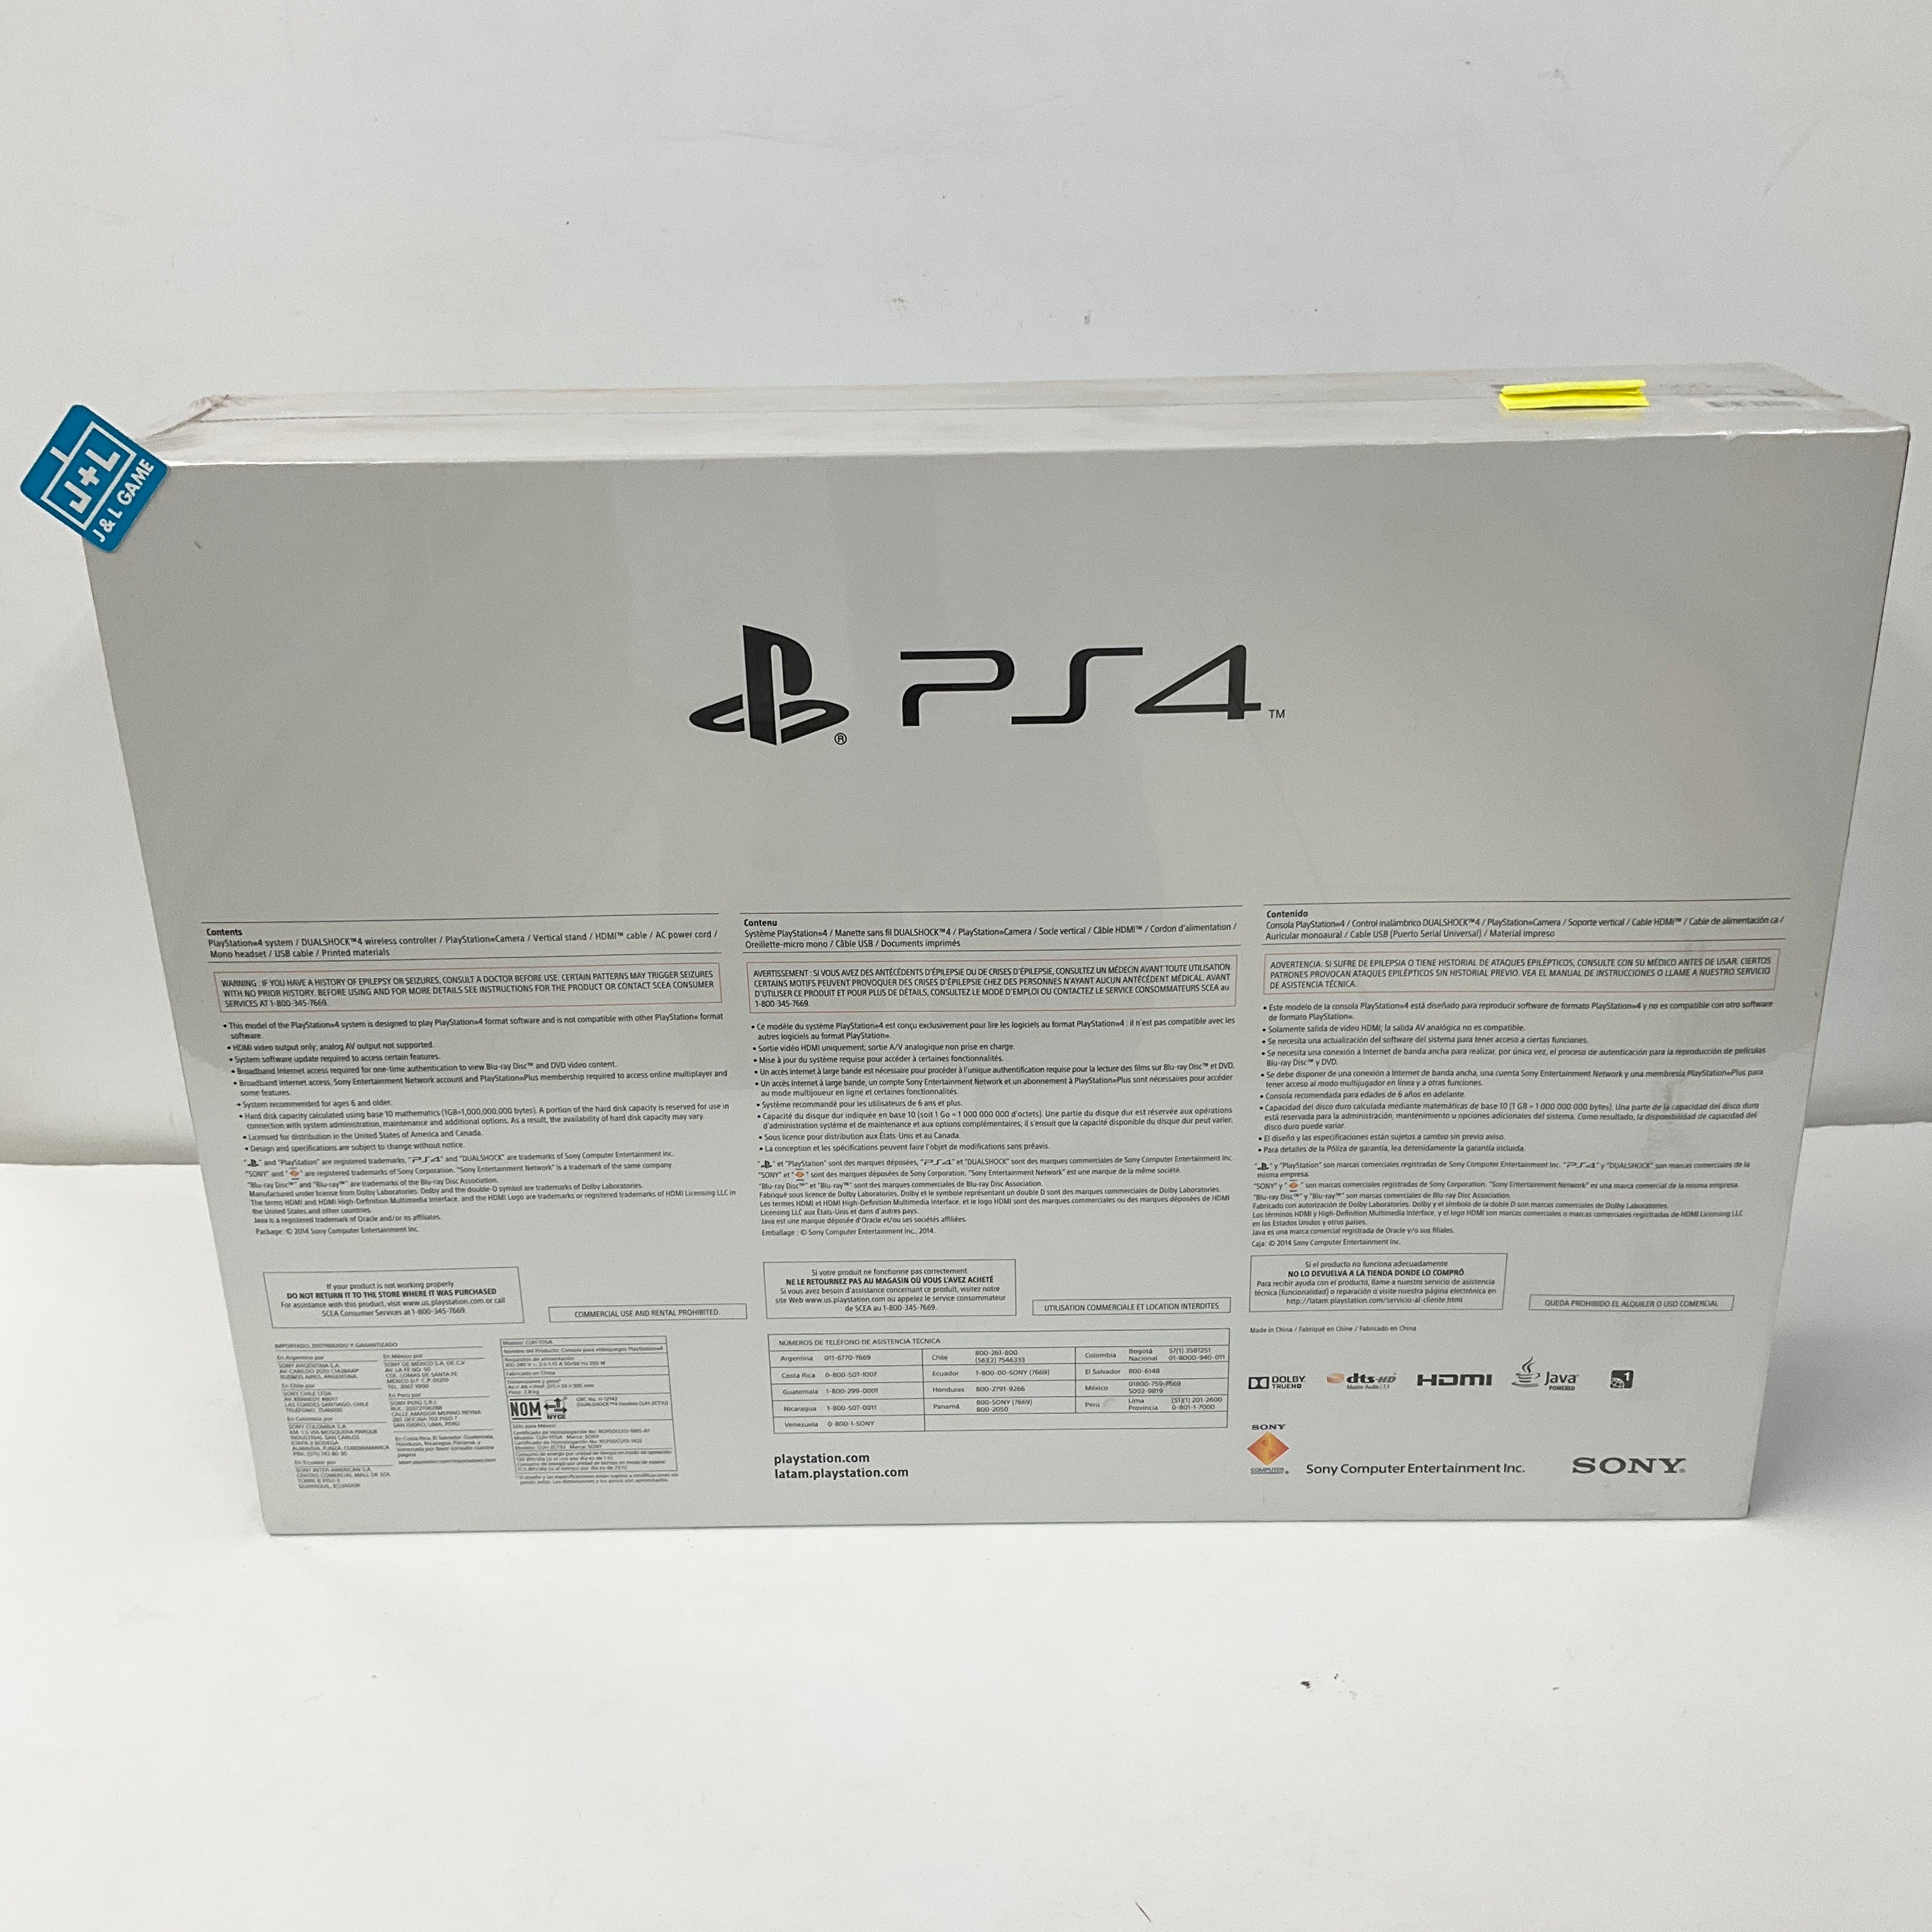 Sony Playstation 4 Console - 20th Anniversary Edition Consoles Sony   